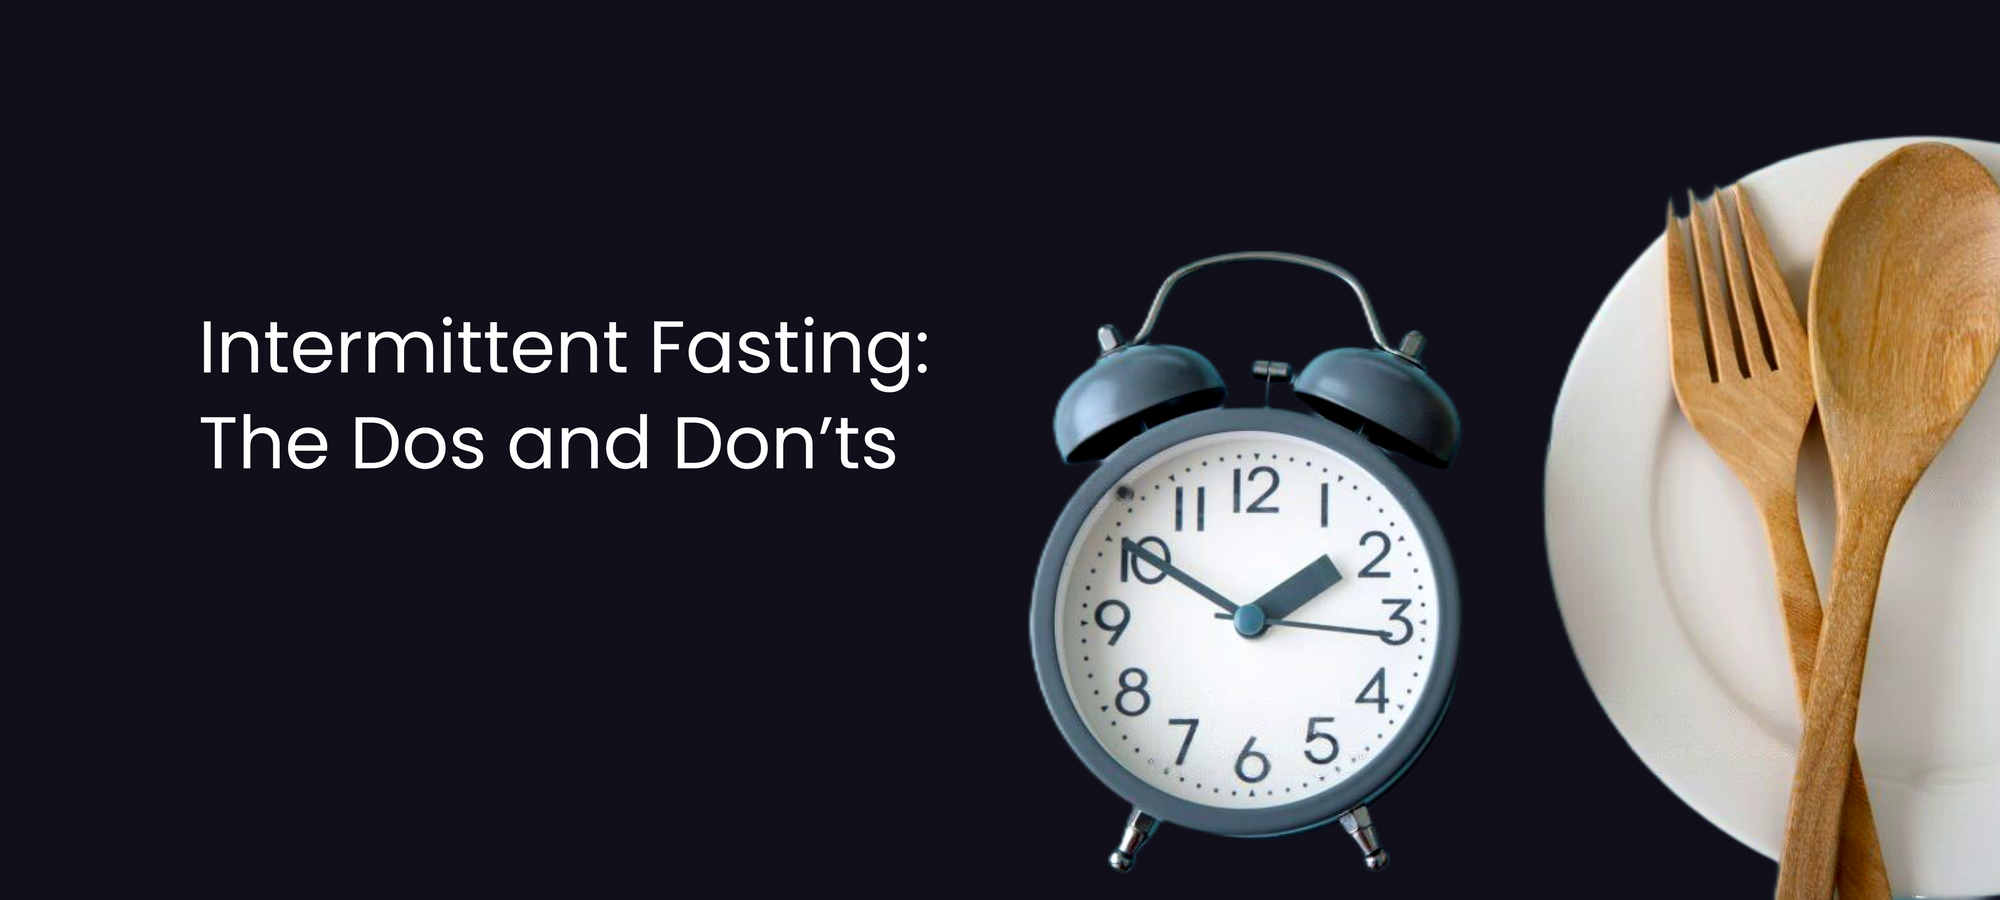 intermittent fasting: the dos and dont's